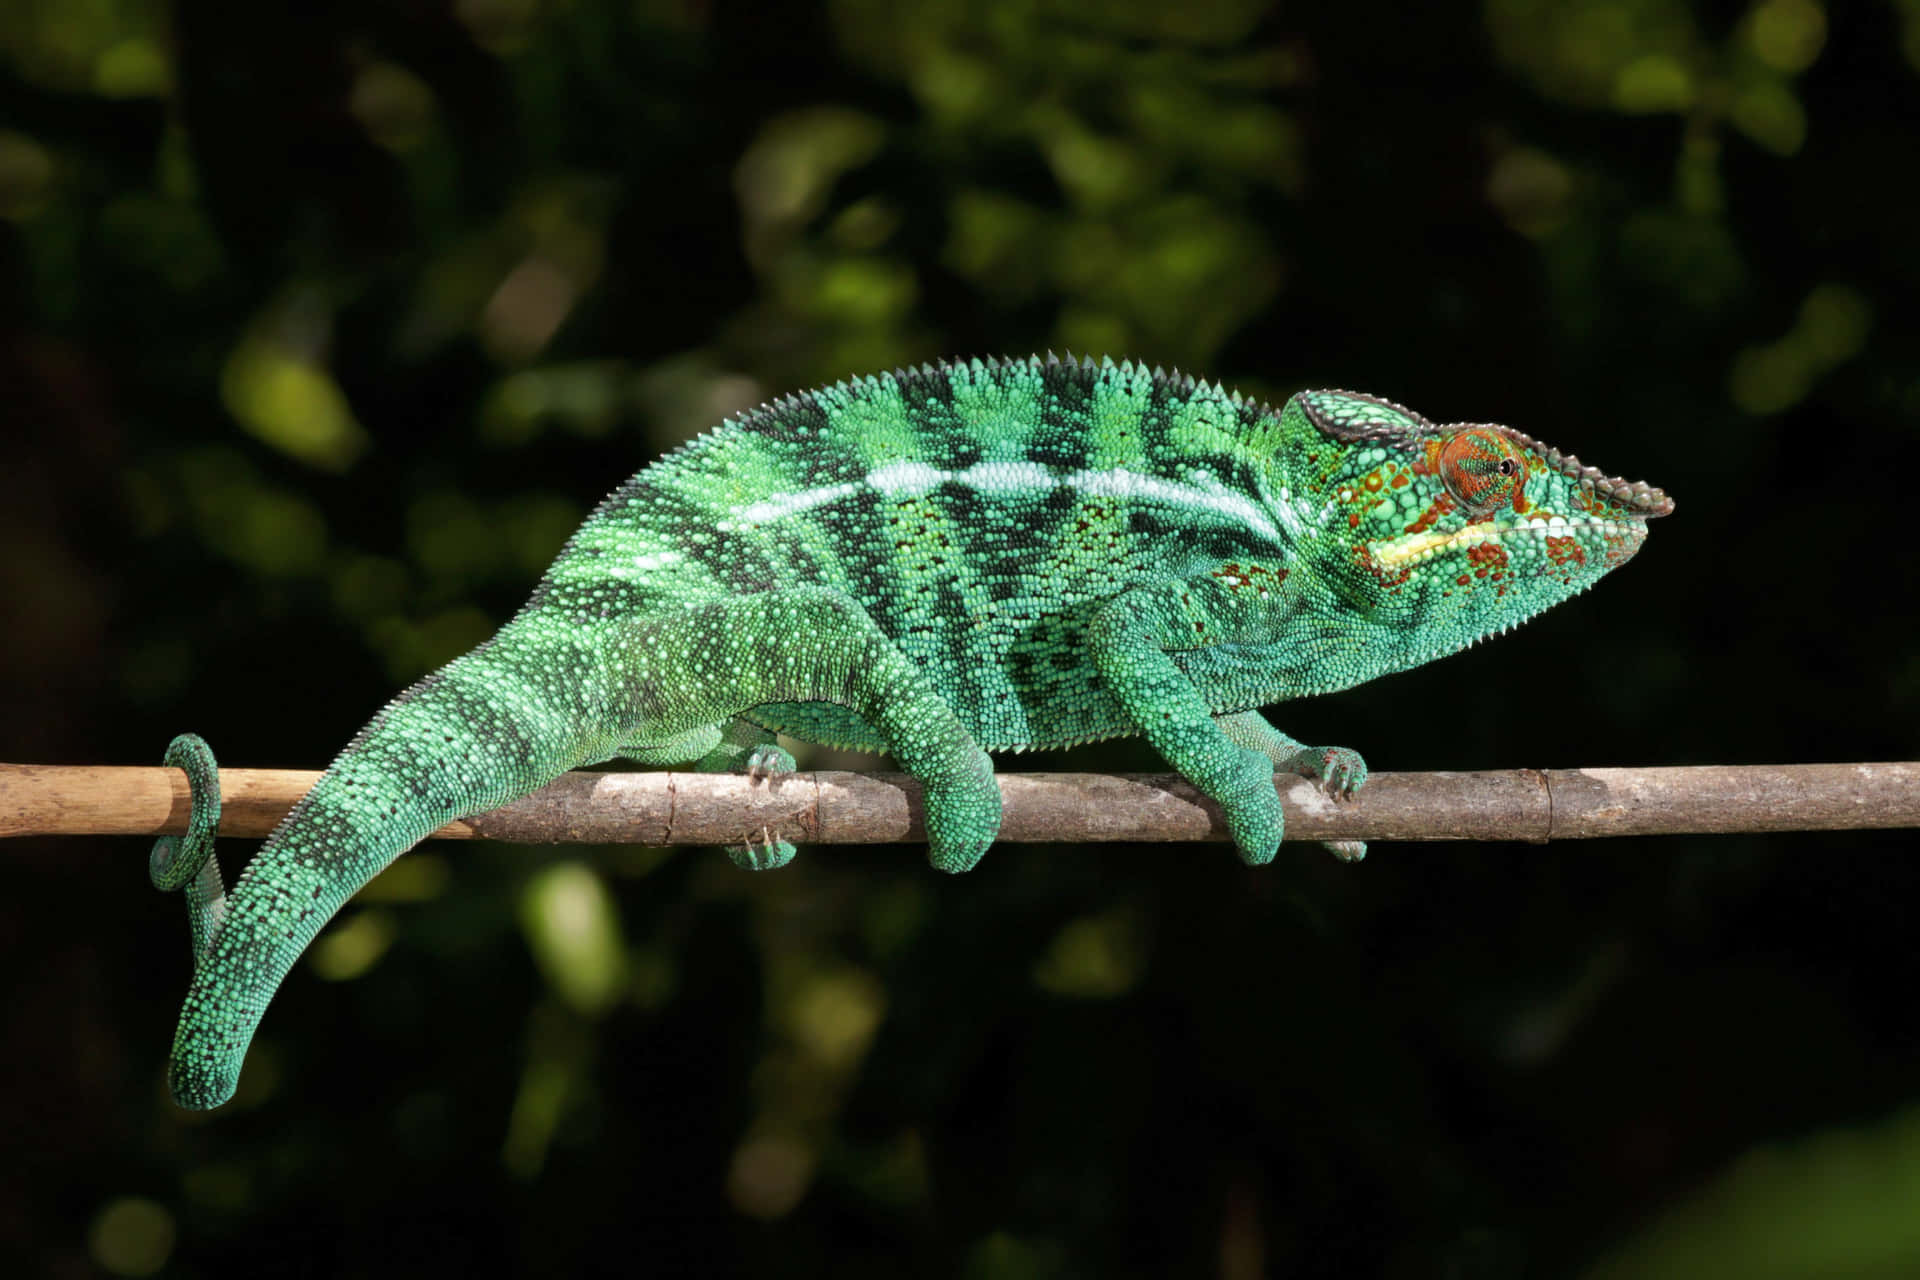 A Green Chameleon Is Sitting On A Branch